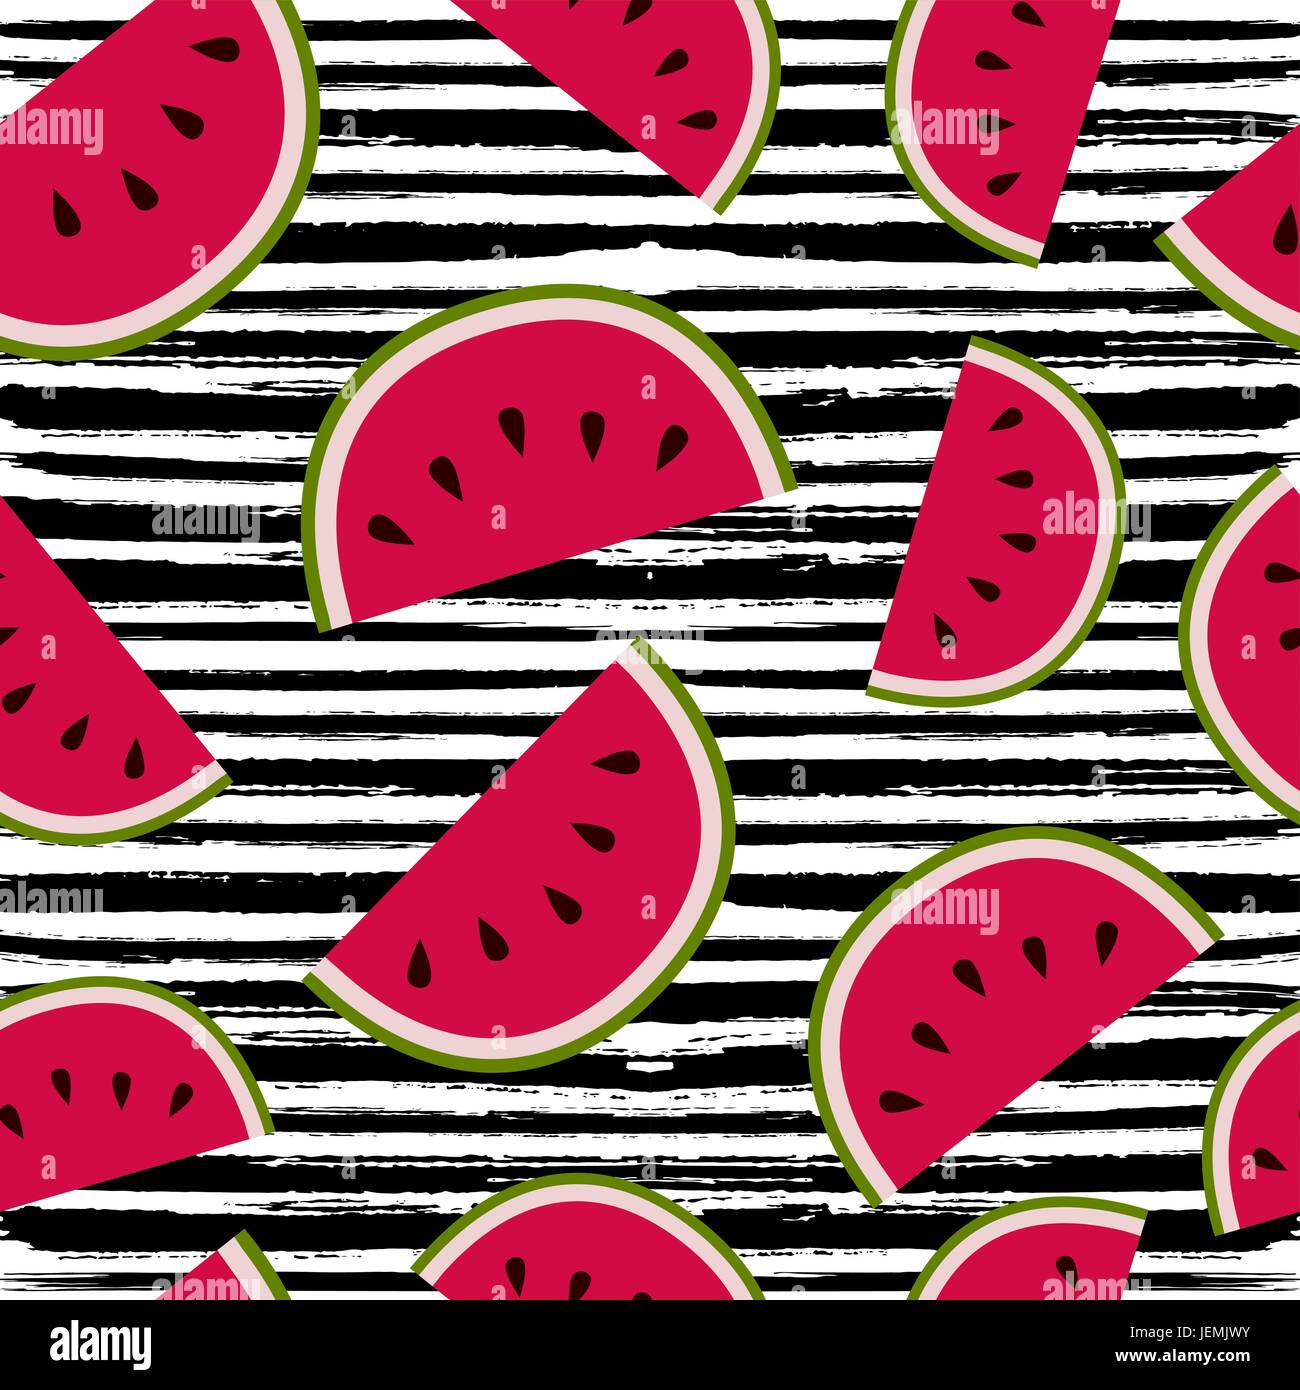 Summer seamless pattern design with watermelon fruit illustration, fun summertime background. EPS10 vector. Stock Vector